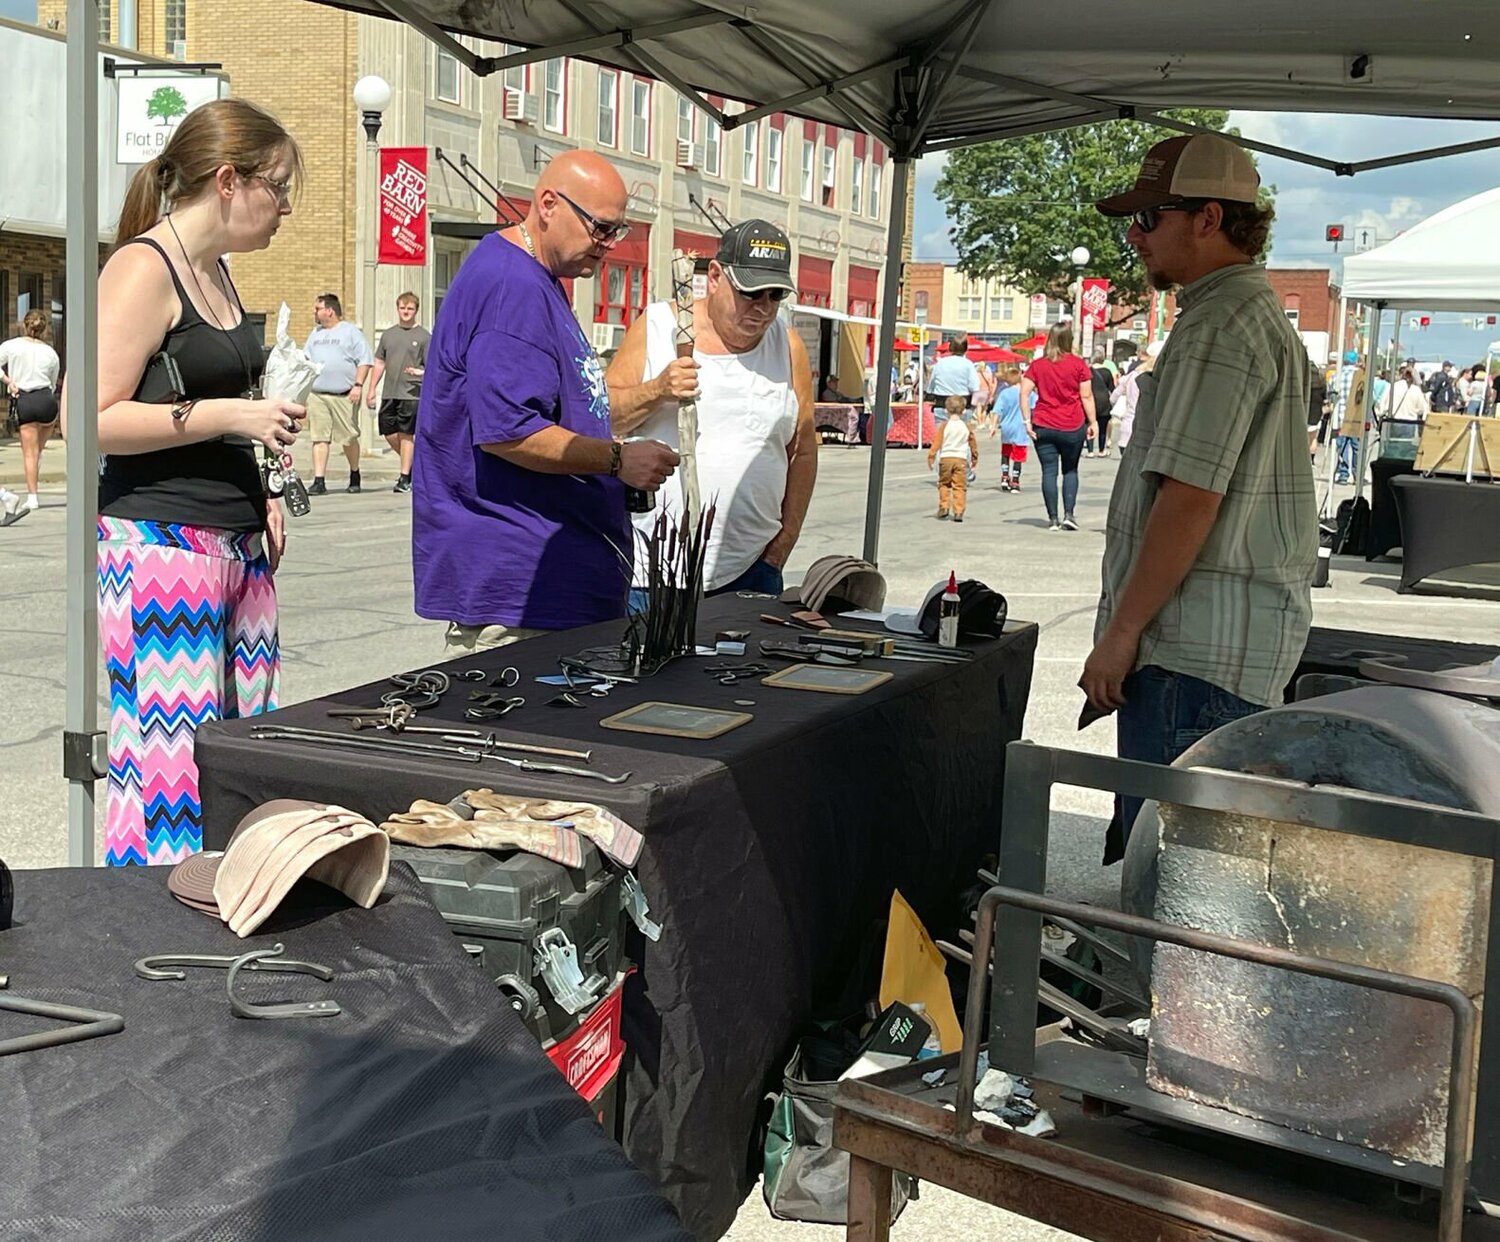 A wide range of artistic vendors filled the streets at the Red Barn Arts and Crafts Festival.